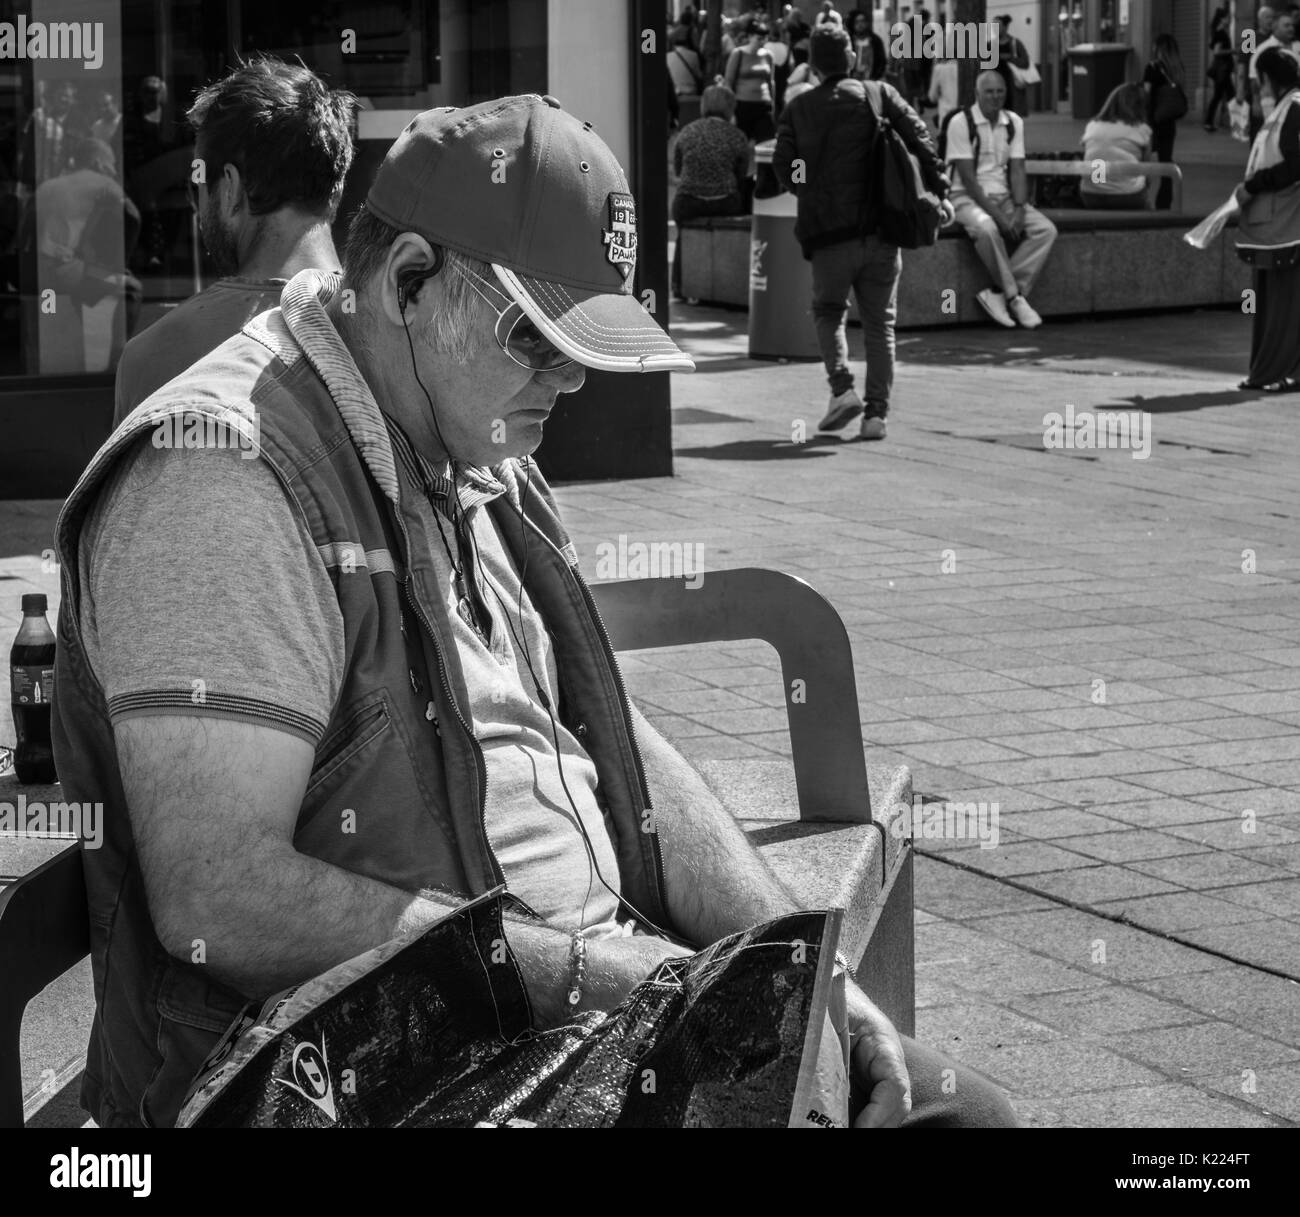 Man sitting on bench with earphones, listening to music. Liverpool, England, UK Stock Photo